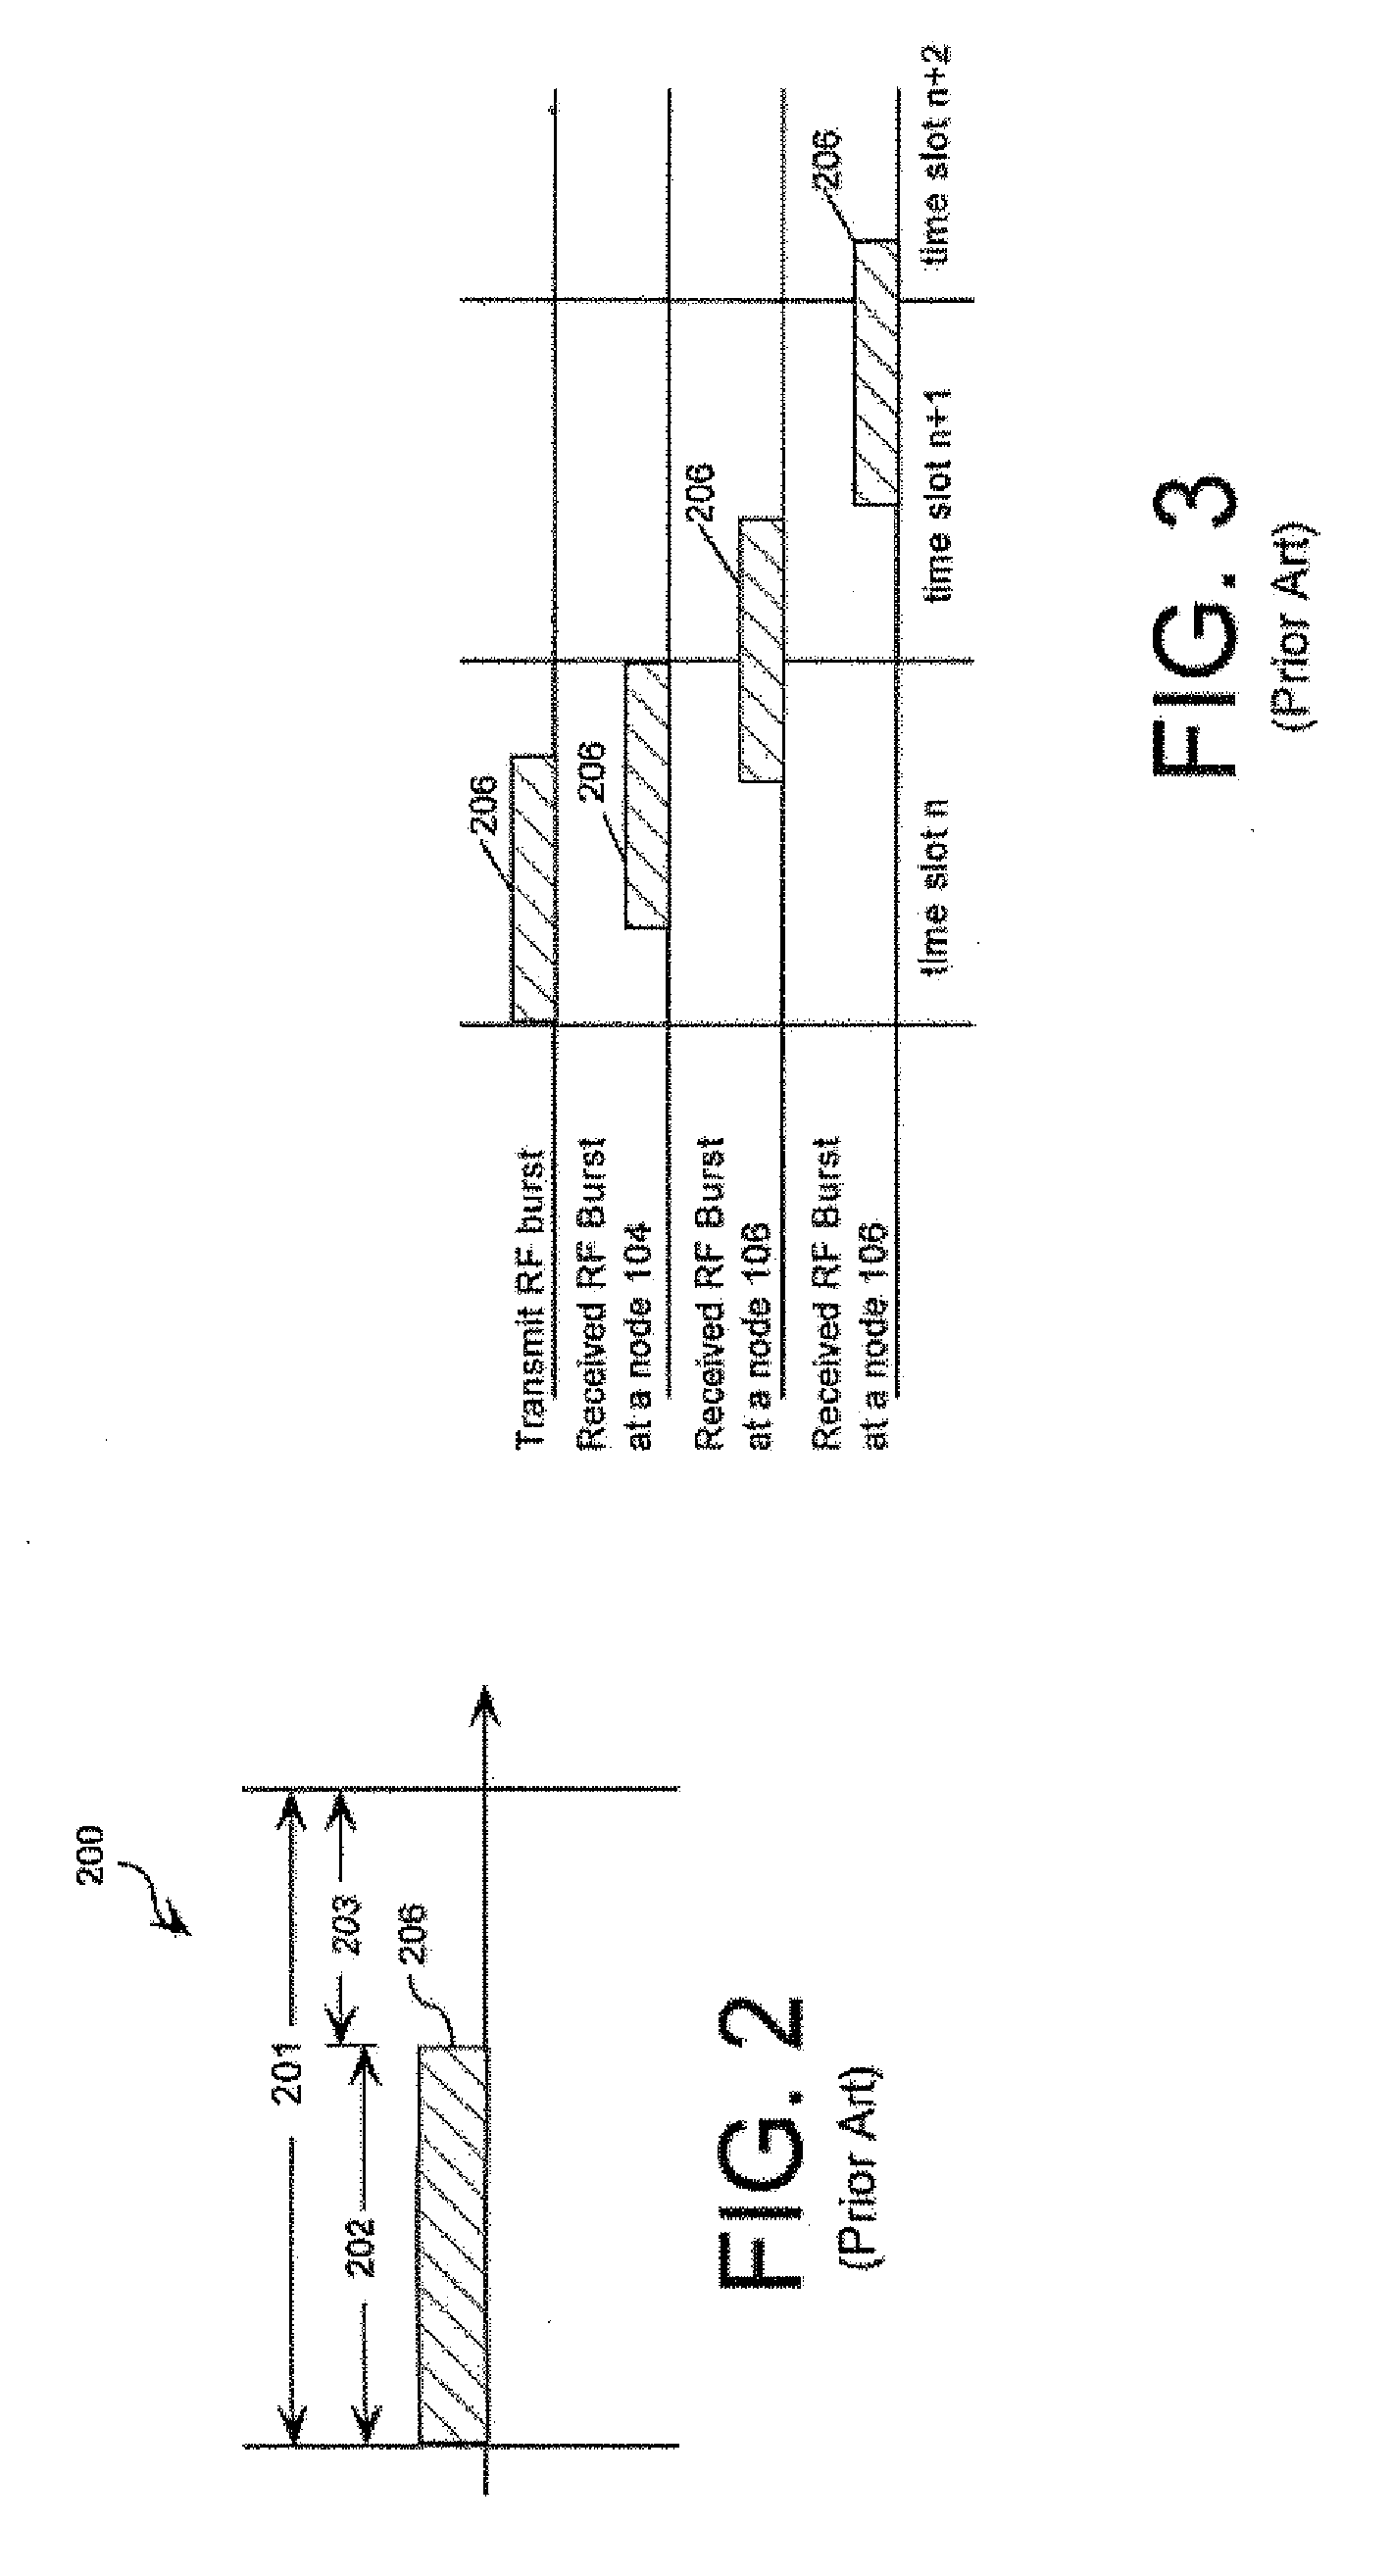 Mobile ad-hoc network providing desired link delay offset without guard times and related methods